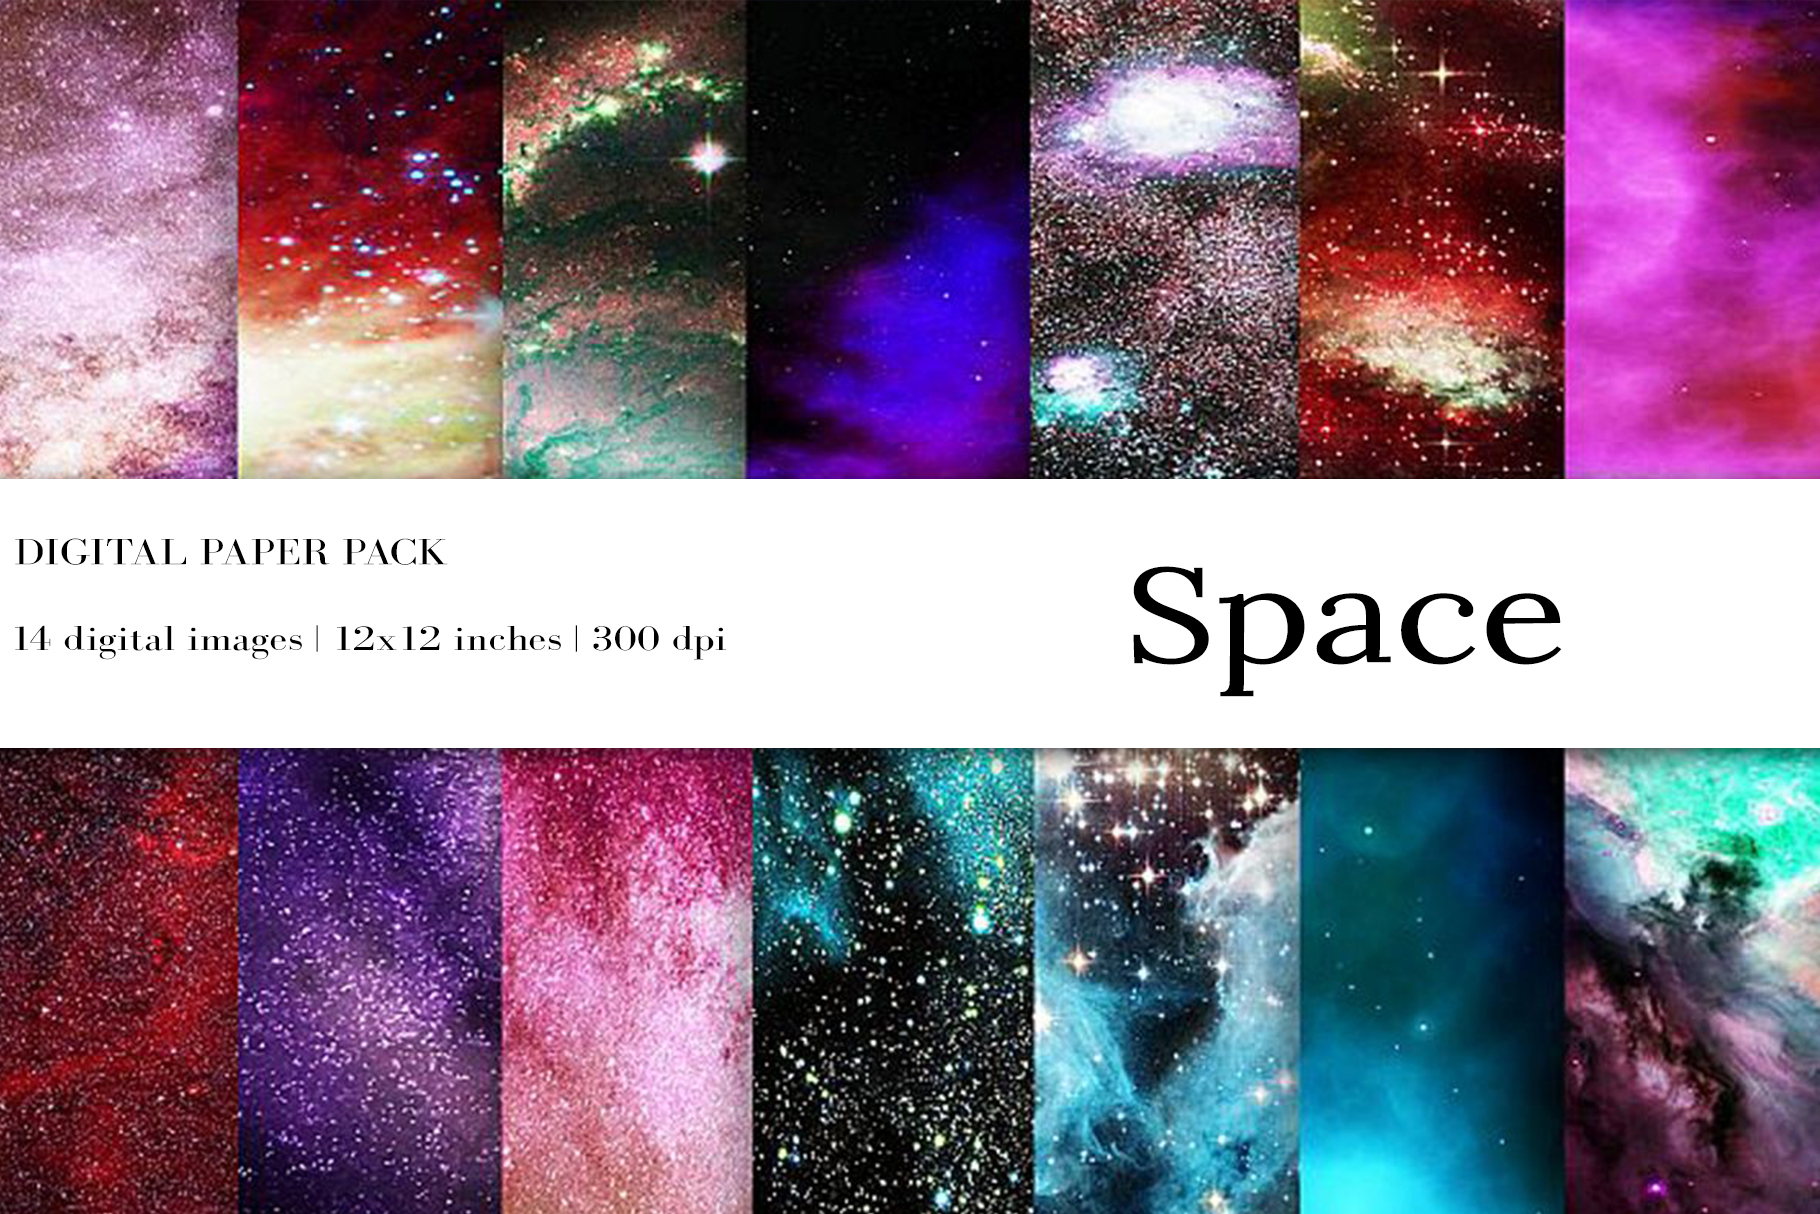 Discover Digital Galaxy. Space examples